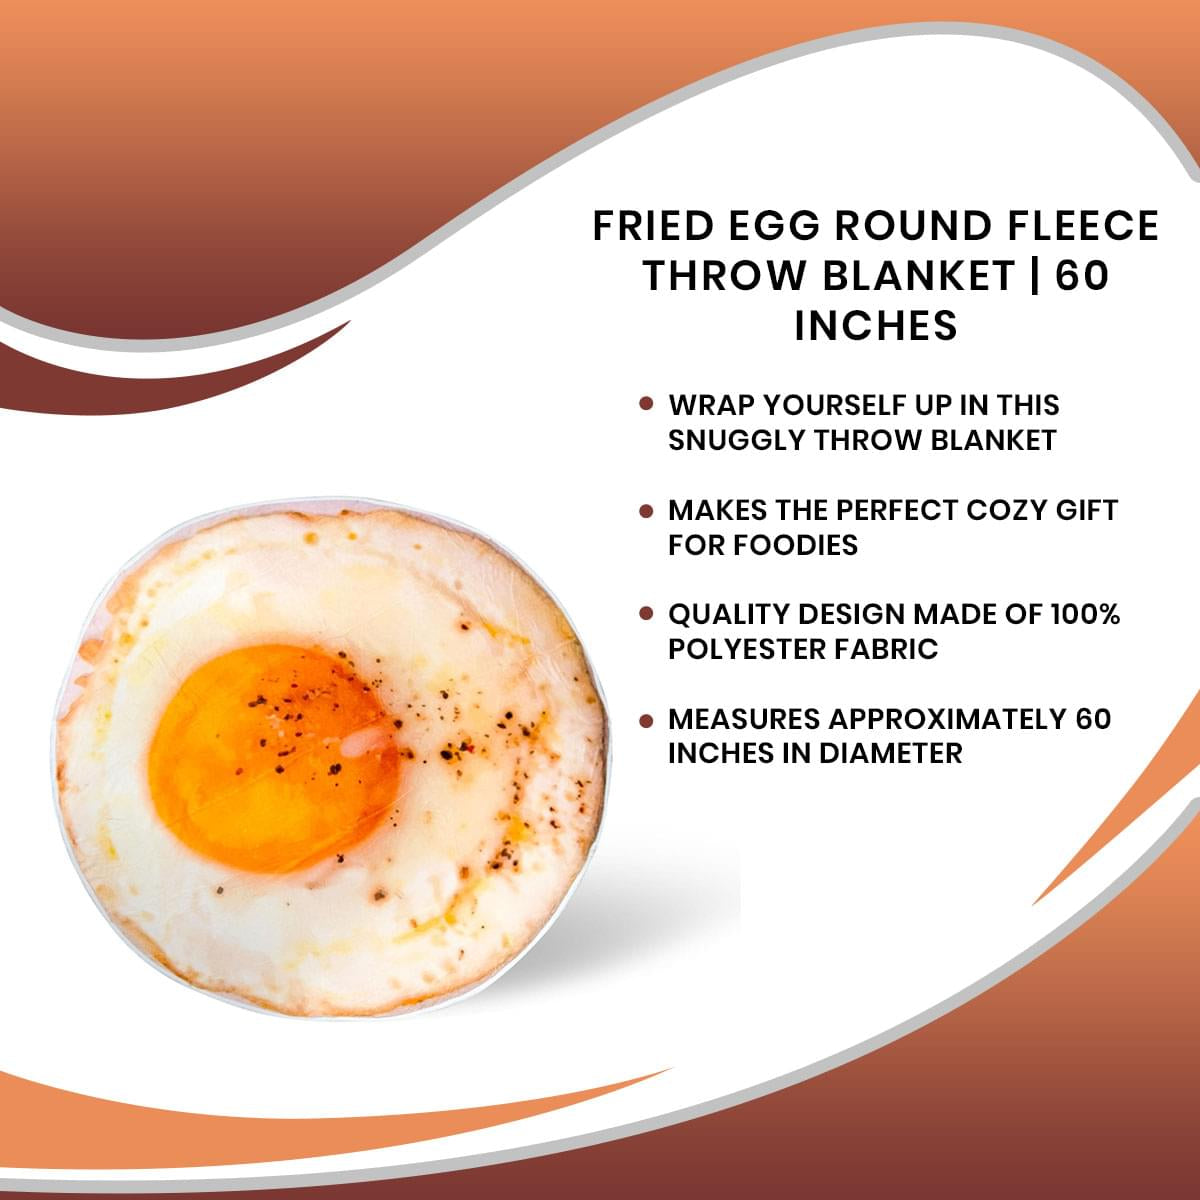 Fried Egg Round Fleece Throw Blanket | 60 Inches